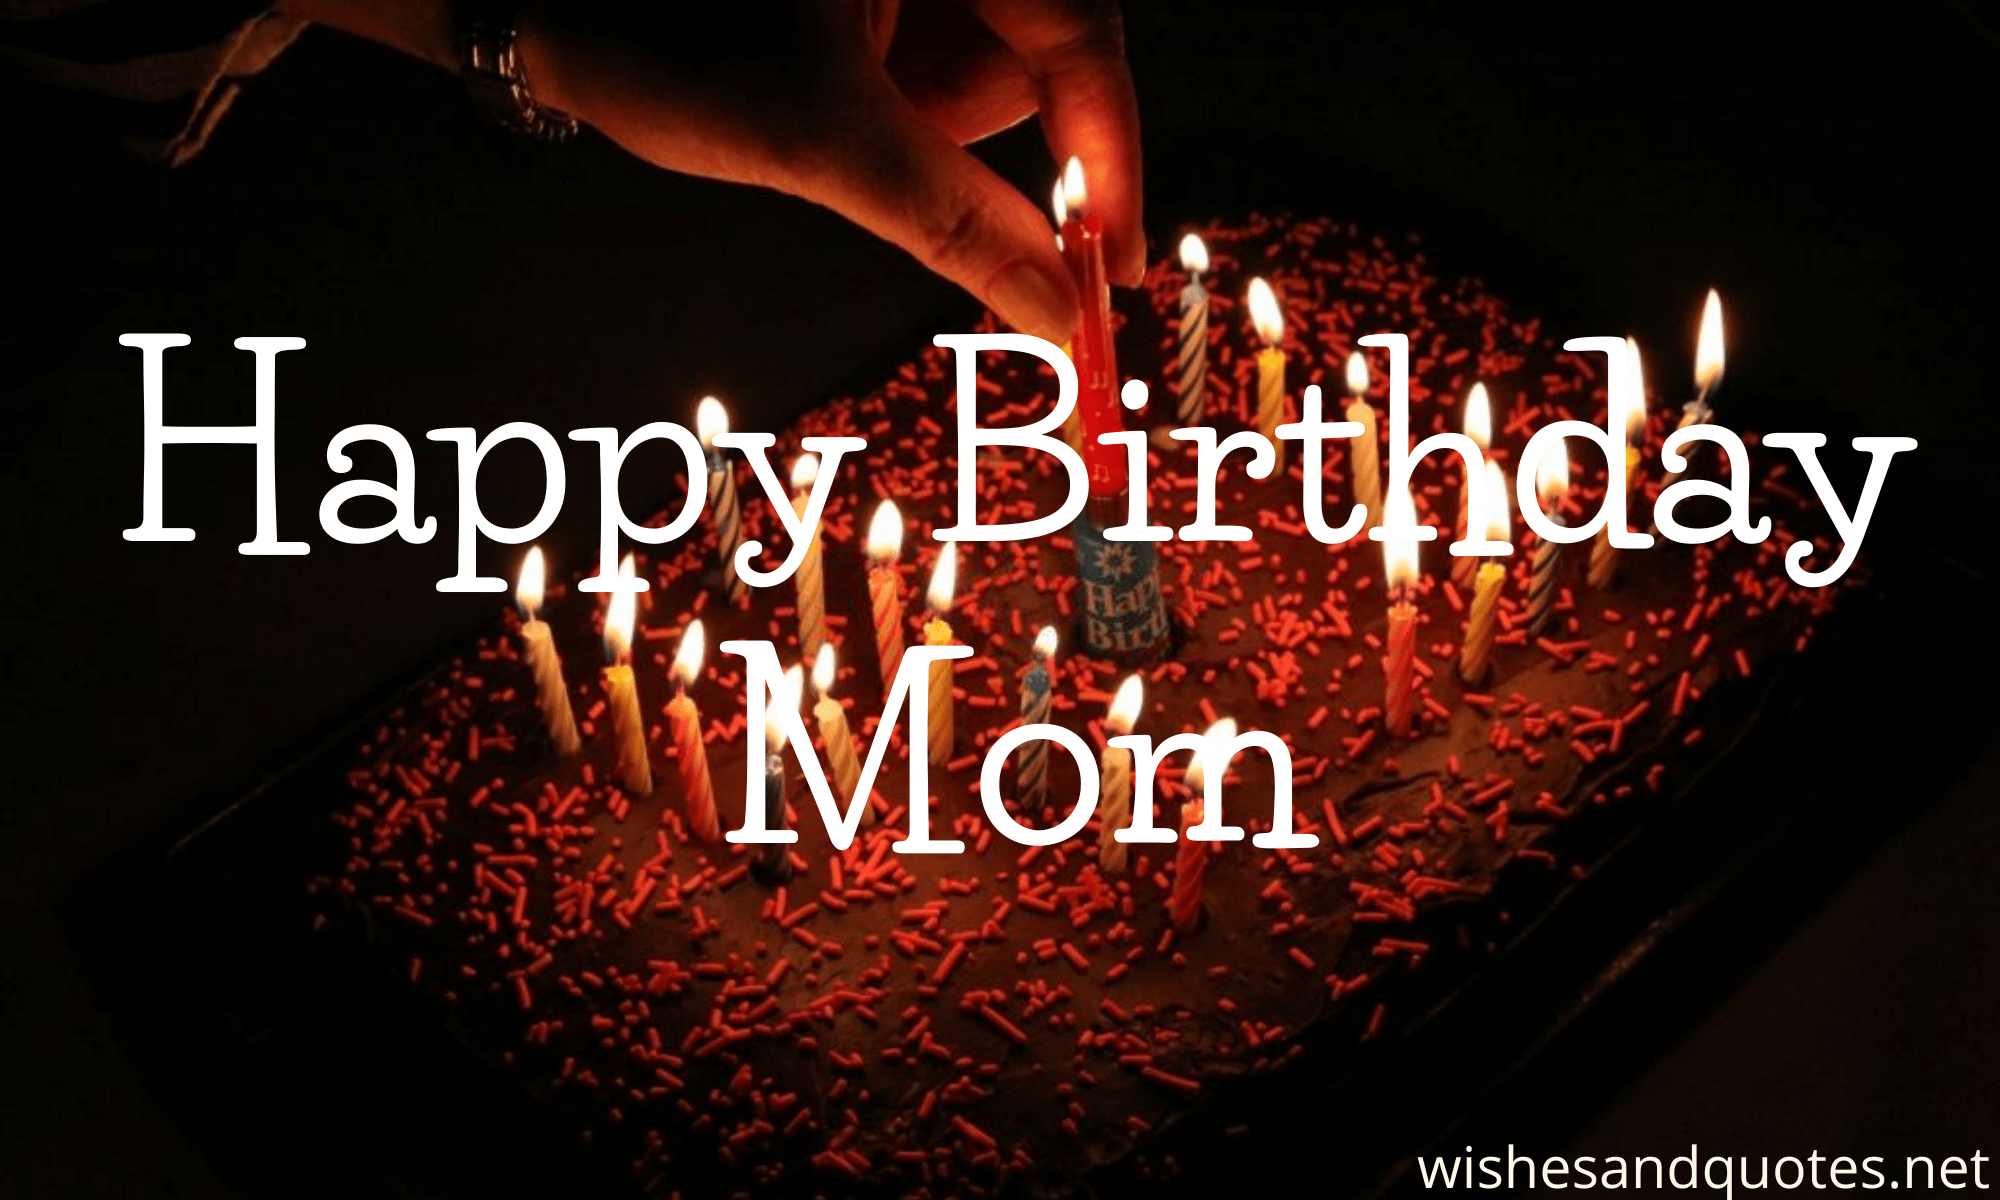 Happy Birthday Wishes for Mom [100 Messages & Image]